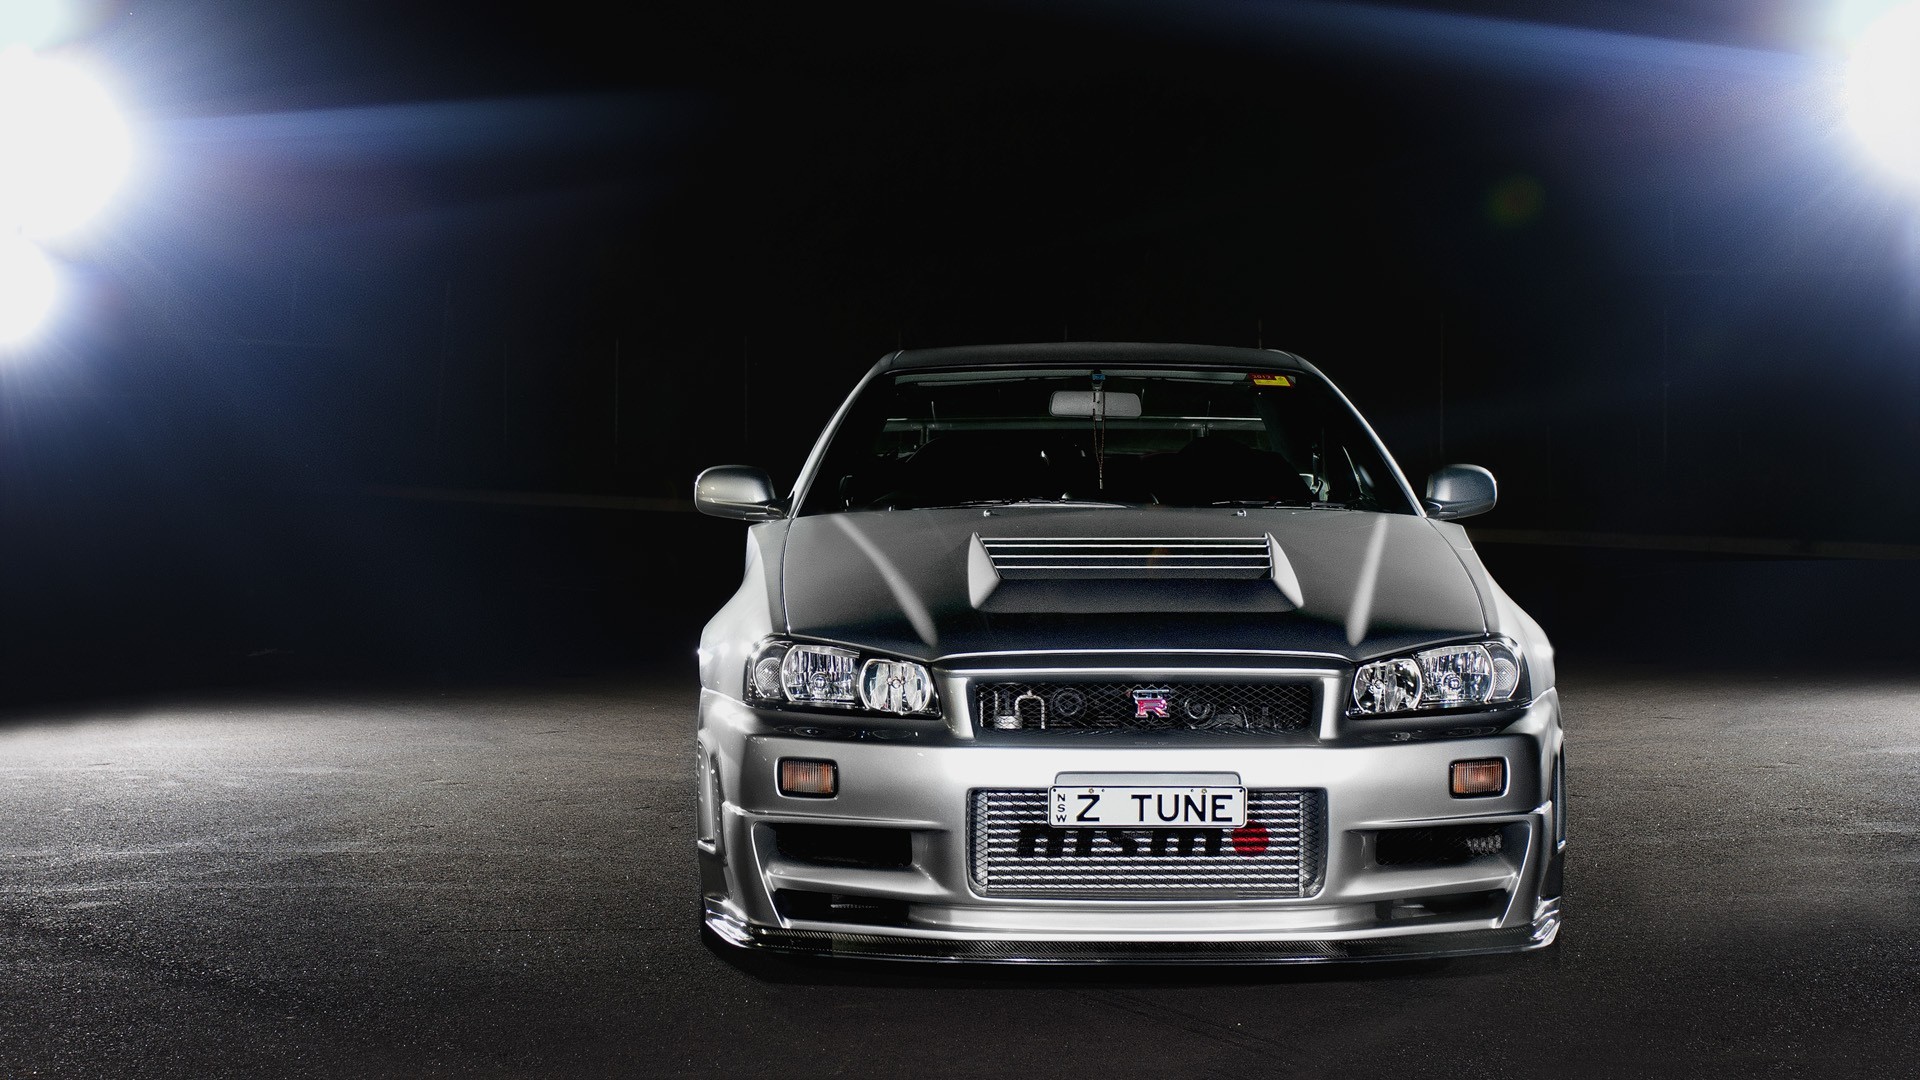 Nissan Skyline Gt R HD Wallpaper Full Pictures